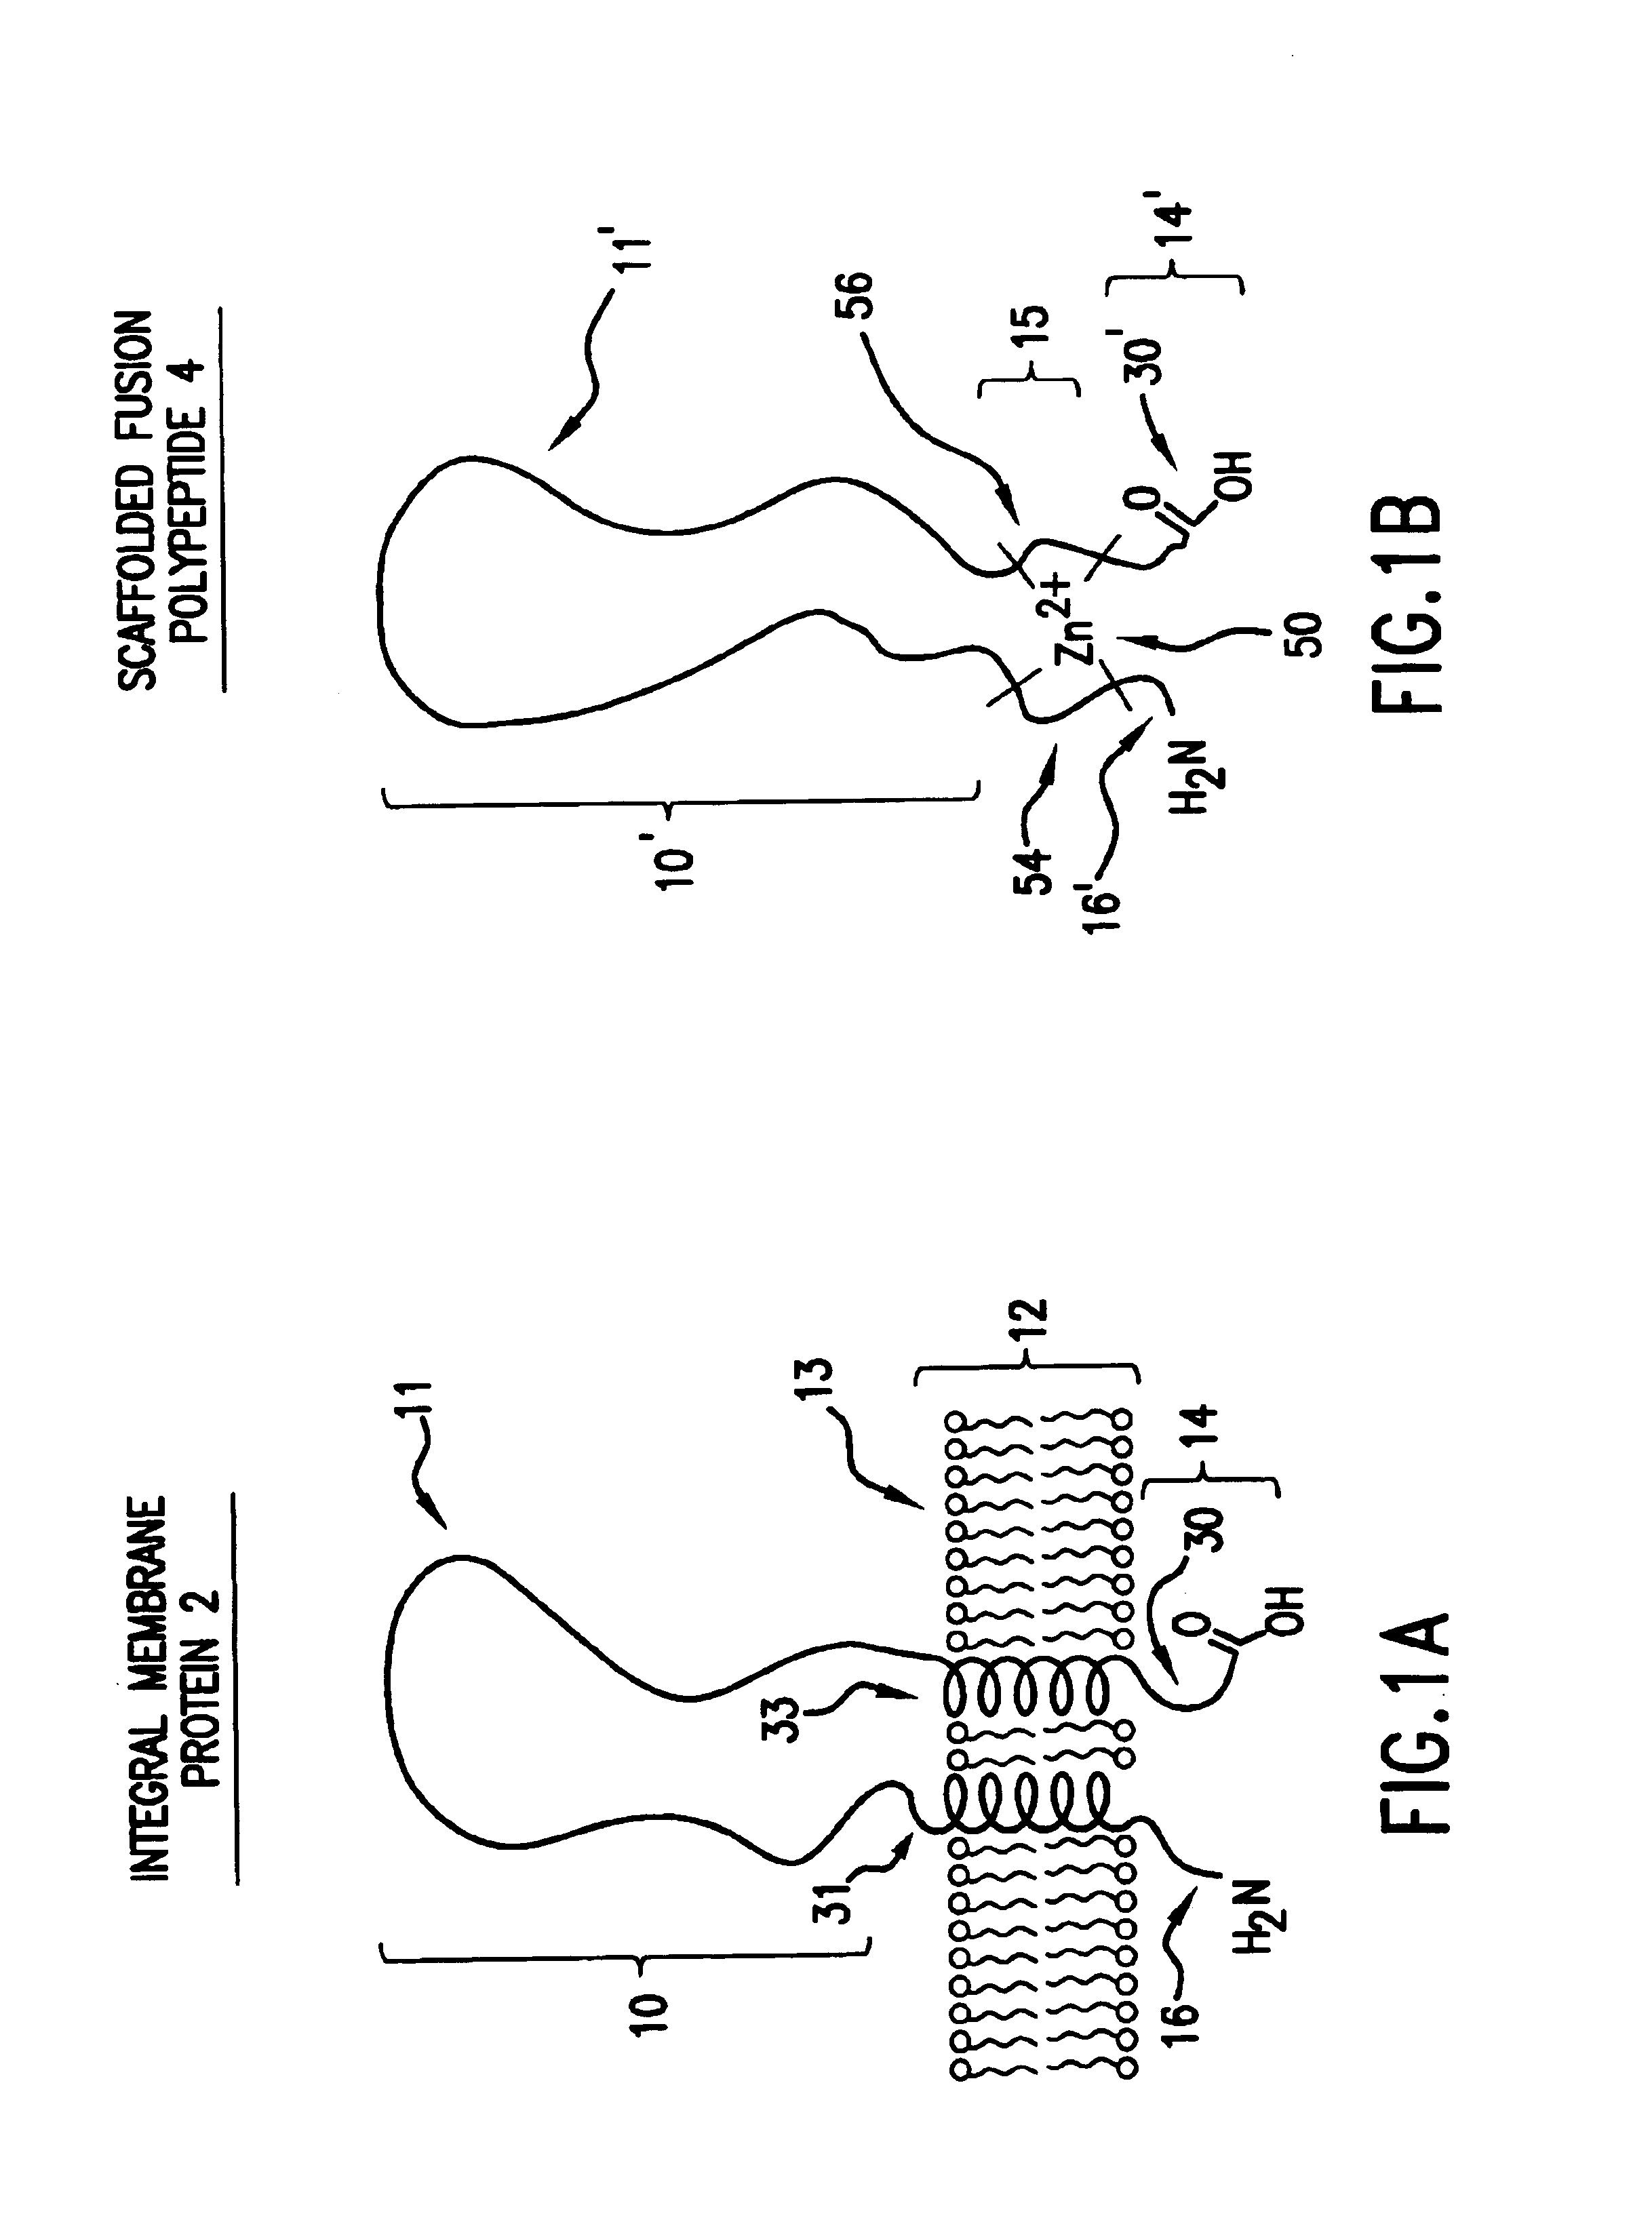 Scaffolded fusion polypeptides and compositions and methods for making the same